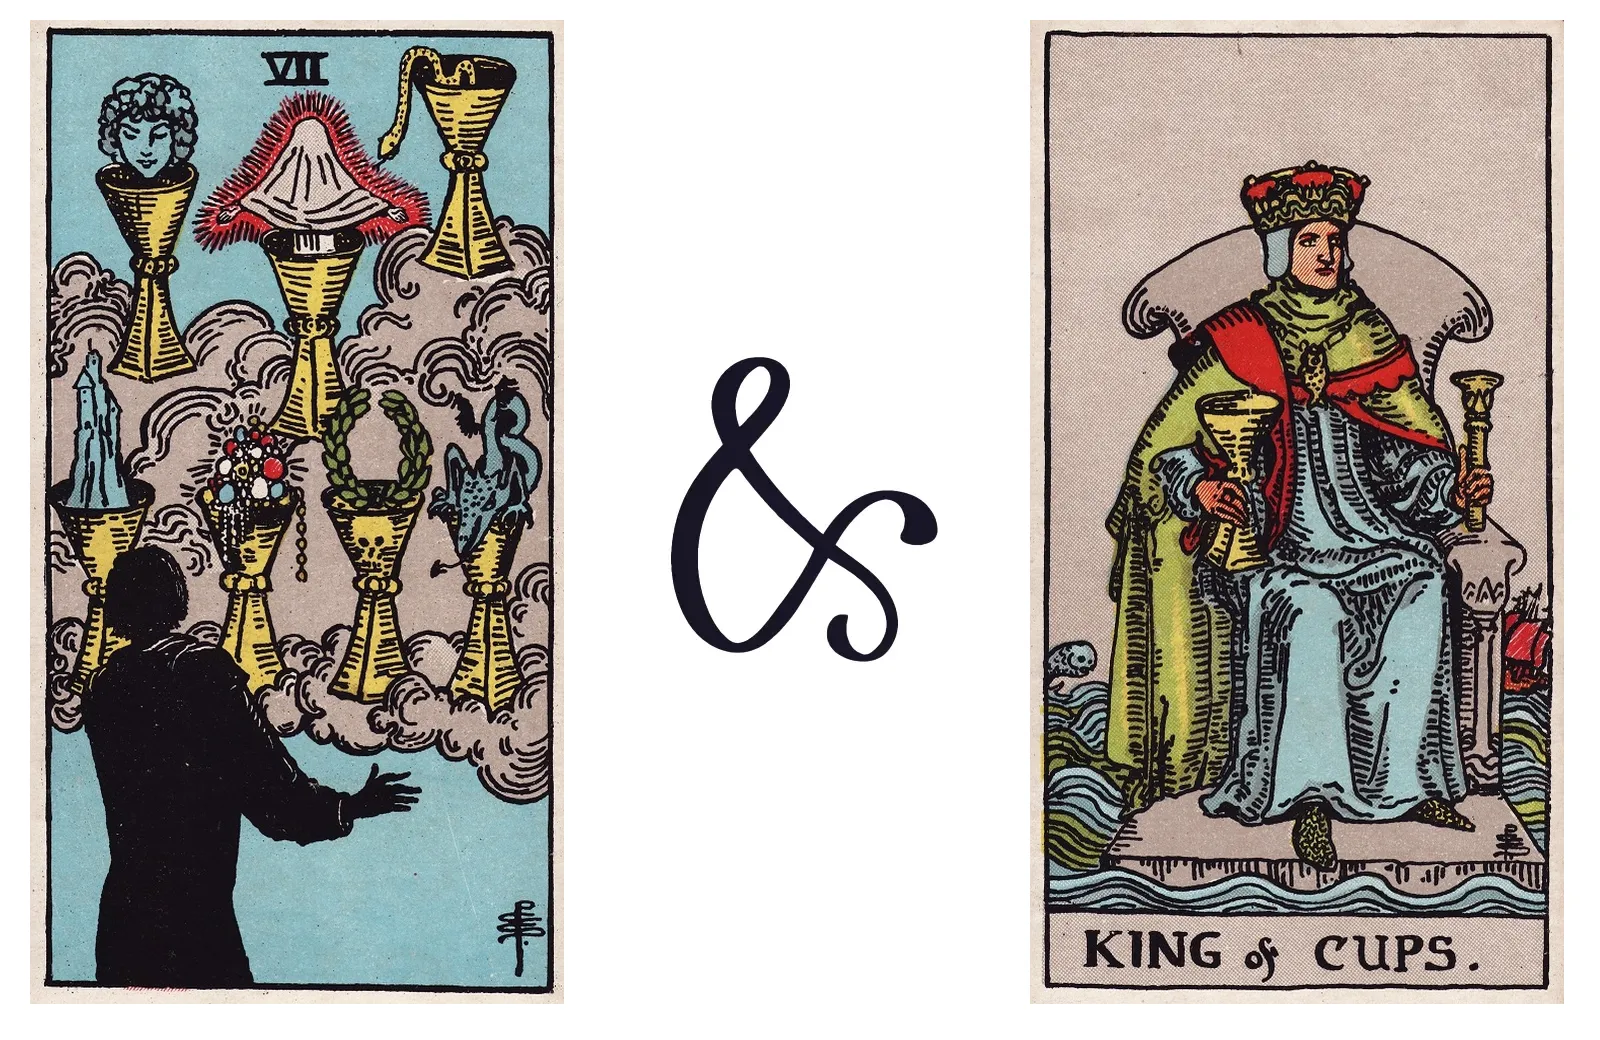 Seven of Cups and King of Cups